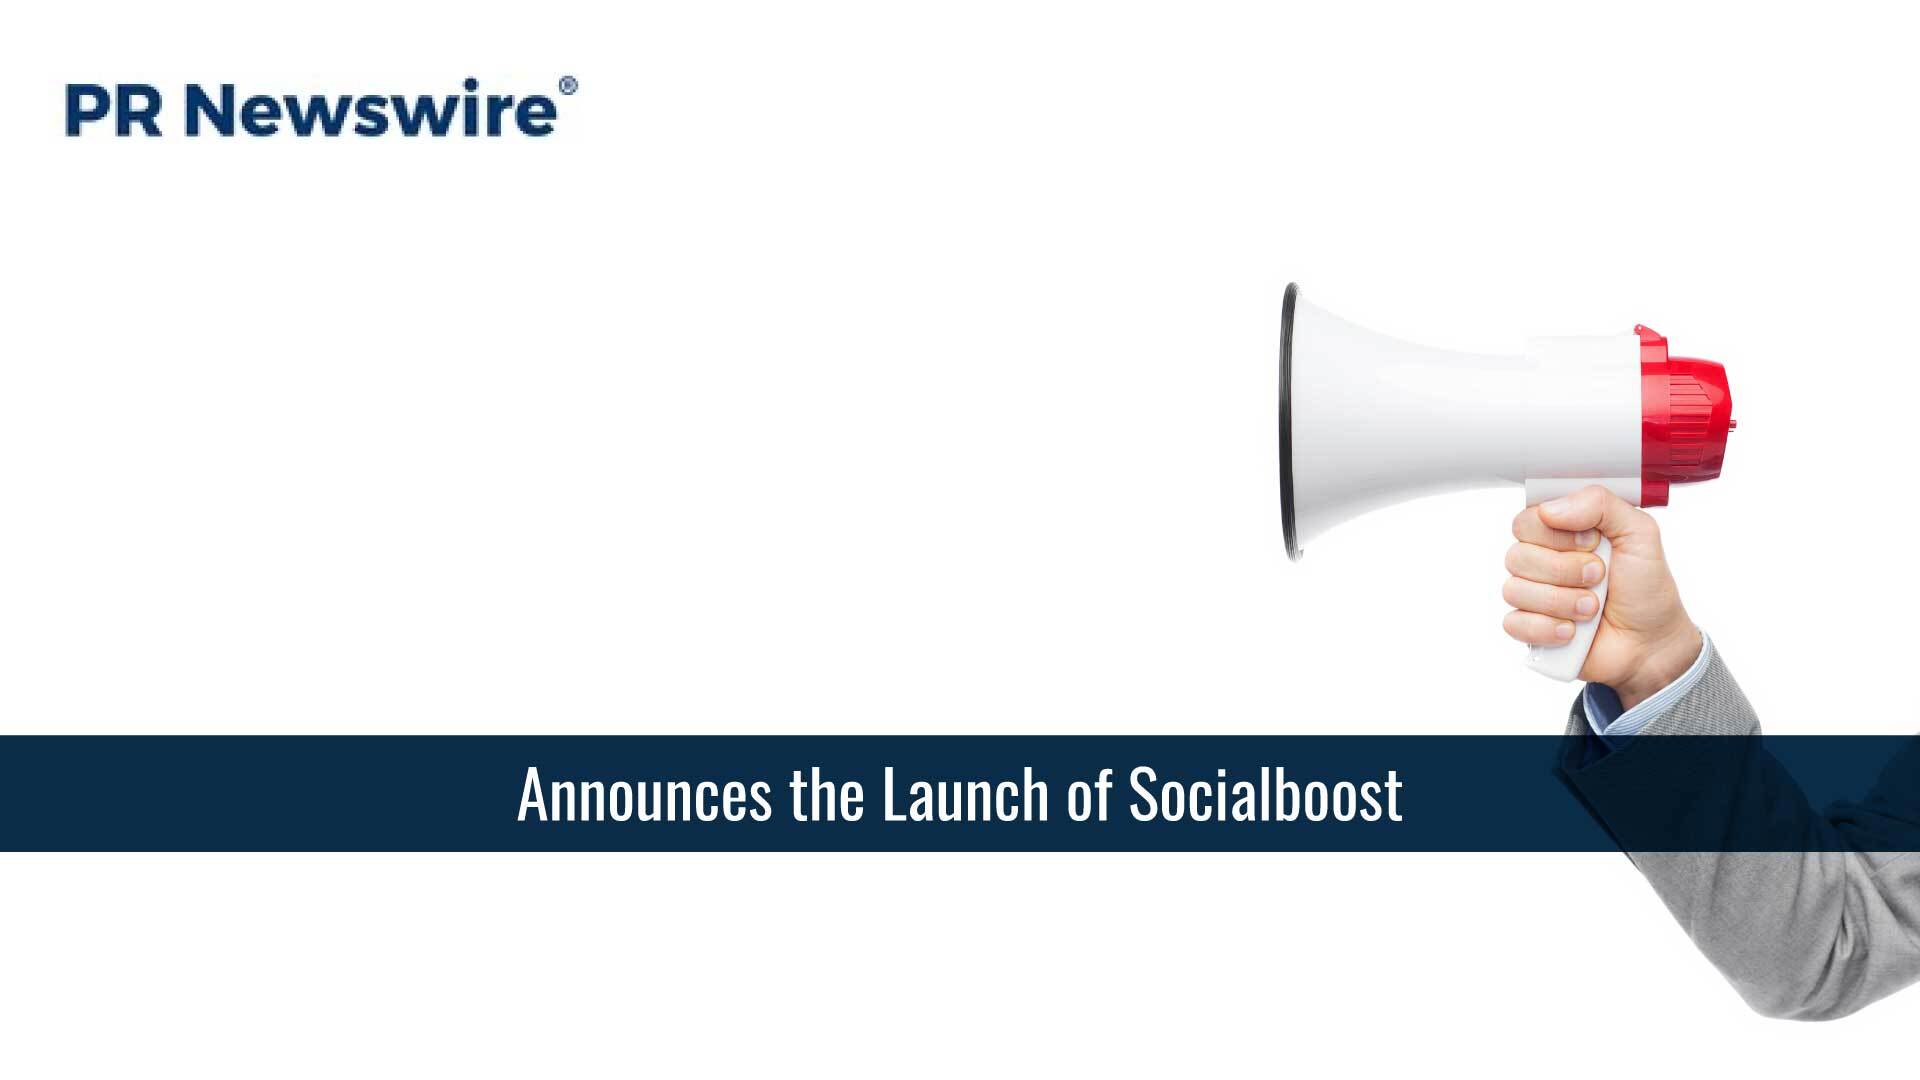 PR Newswire Rolls Out First Ever Press Release Social Sharing Product Designed to Increase User-Generated Content